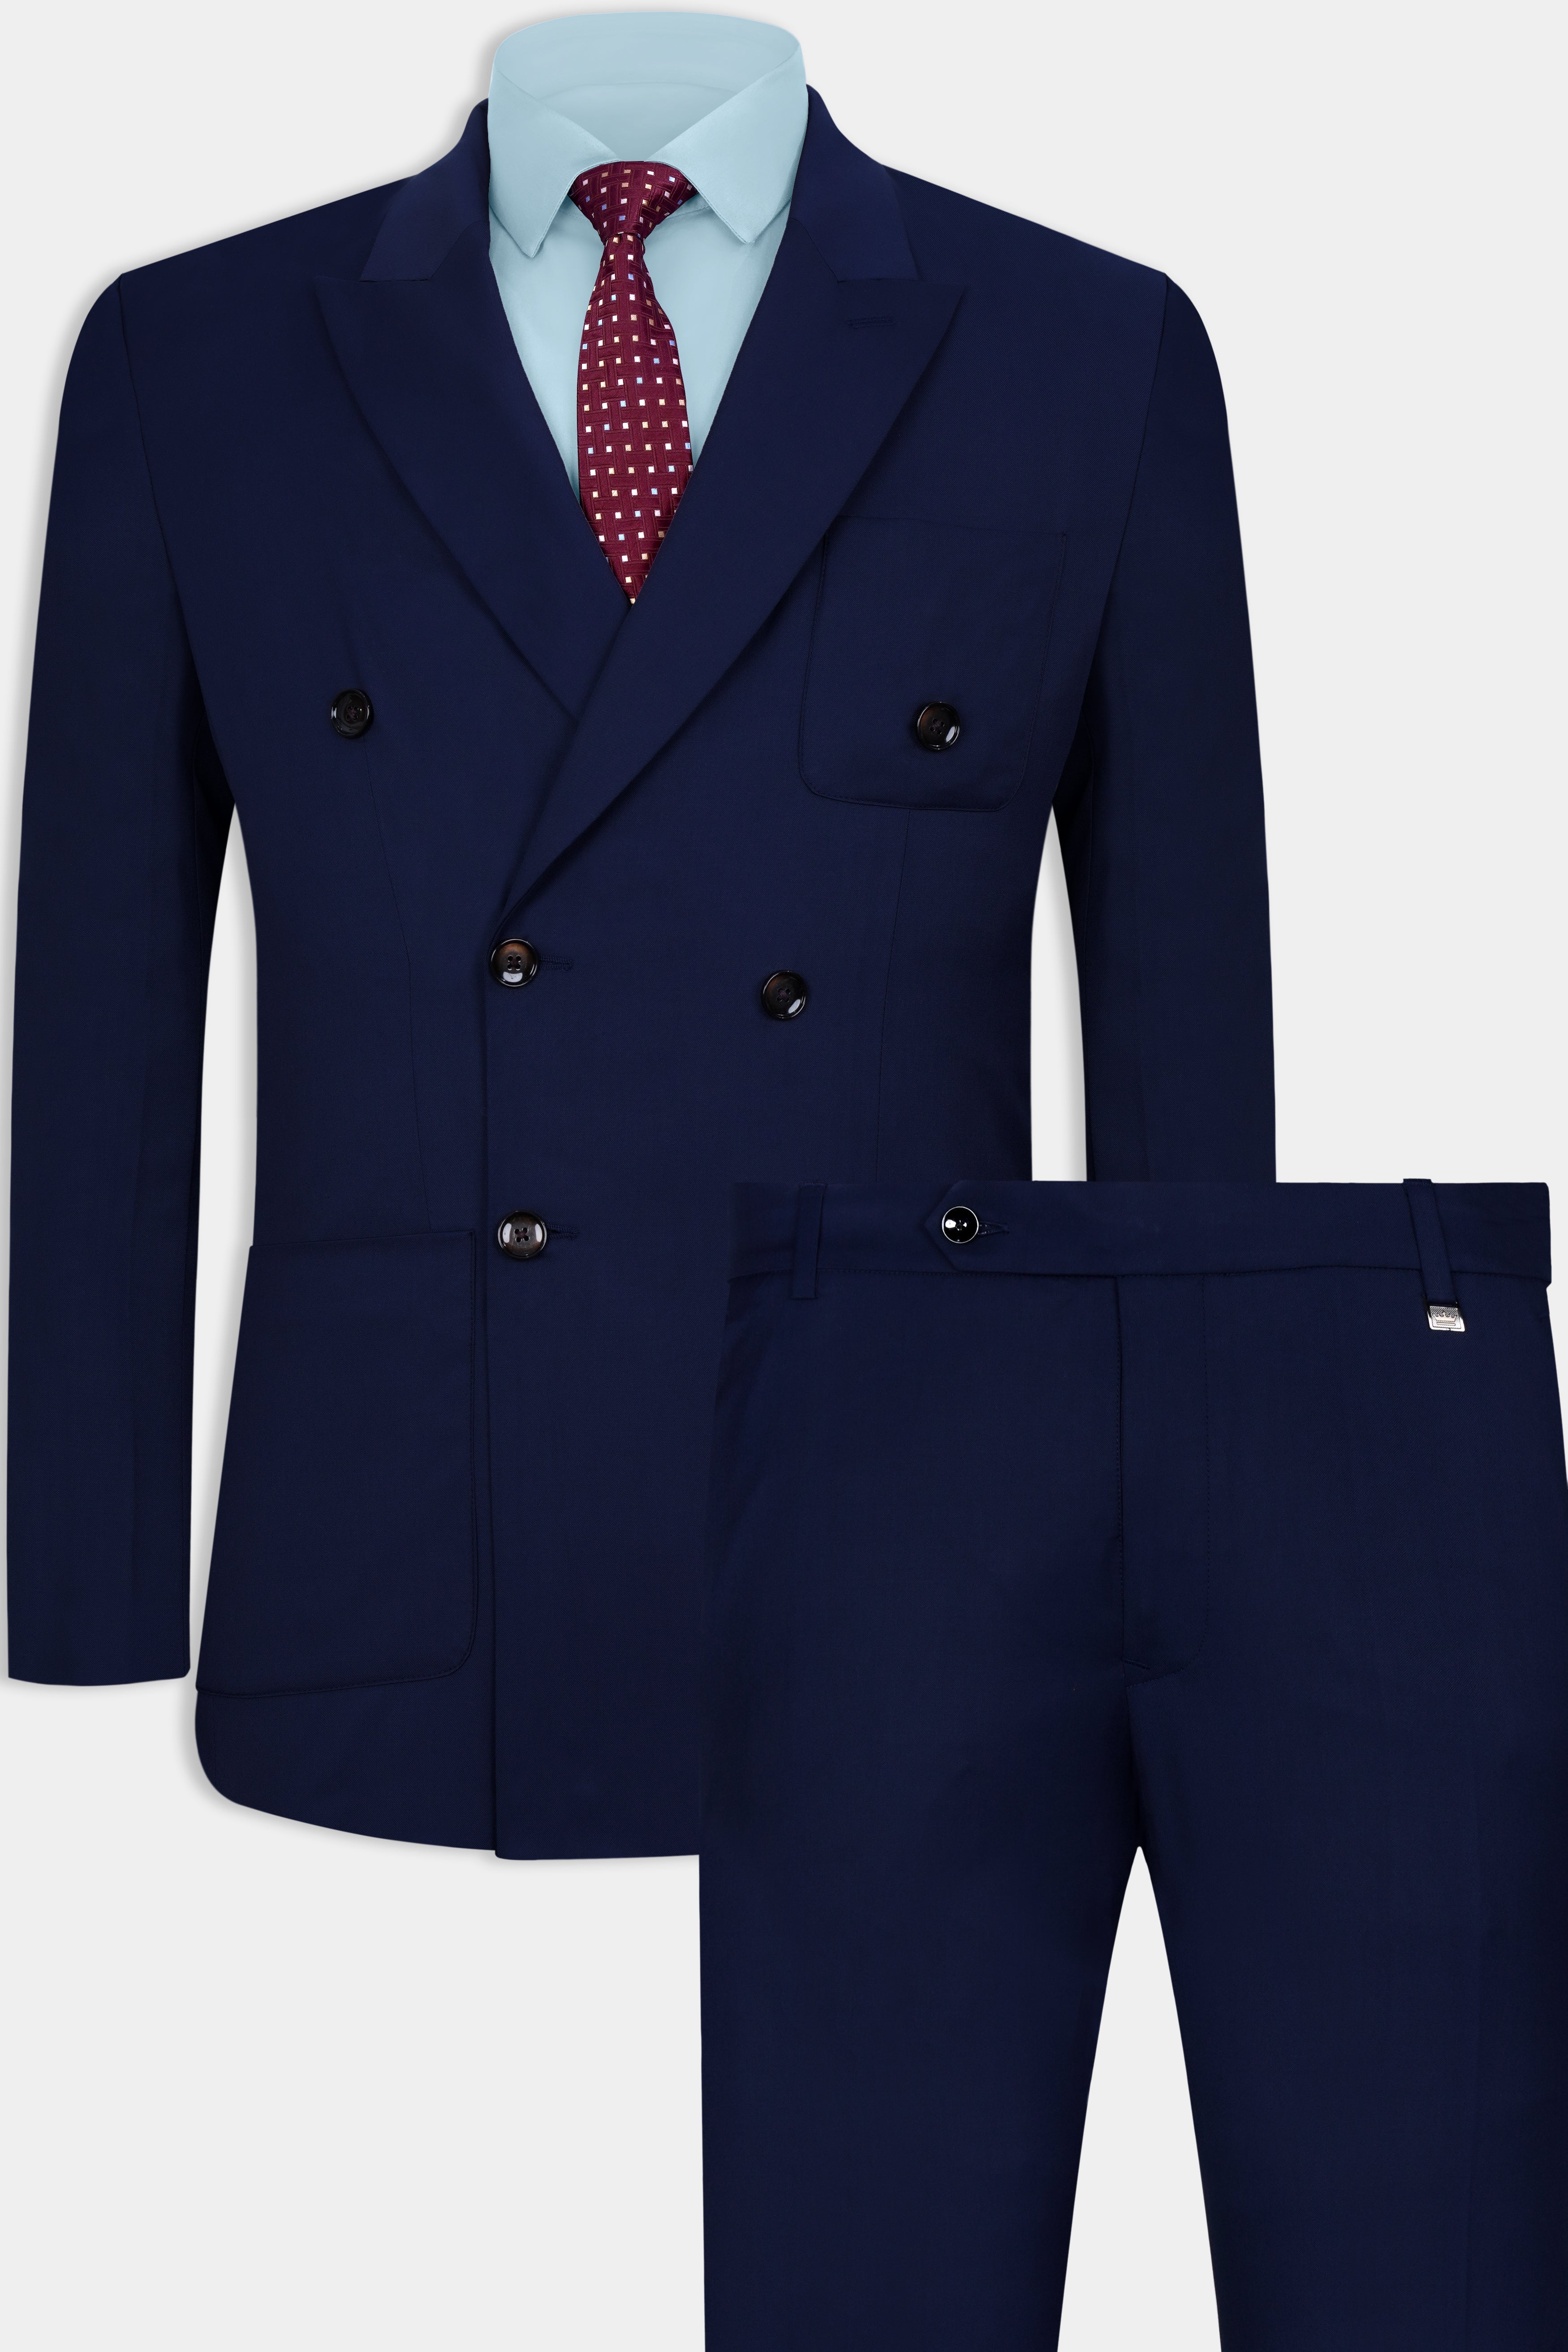 Cinder Blue Wool Rich Double Breasted Sports Suit ST3077-DB-PP-36, ST3077-DB-PP-38, ST3077-DB-PP-40, ST3077-DB-PP-42, ST3077-DB-PP-44, ST3077-DB-PP-46, ST3077-DB-PP-48, ST3077-DB-PP-50, ST3077-DB-PP-52, ST3077-DB-PP-54, ST3077-DB-PP-56, ST3077-DB-PP-58, ST3077-DB-PP-60